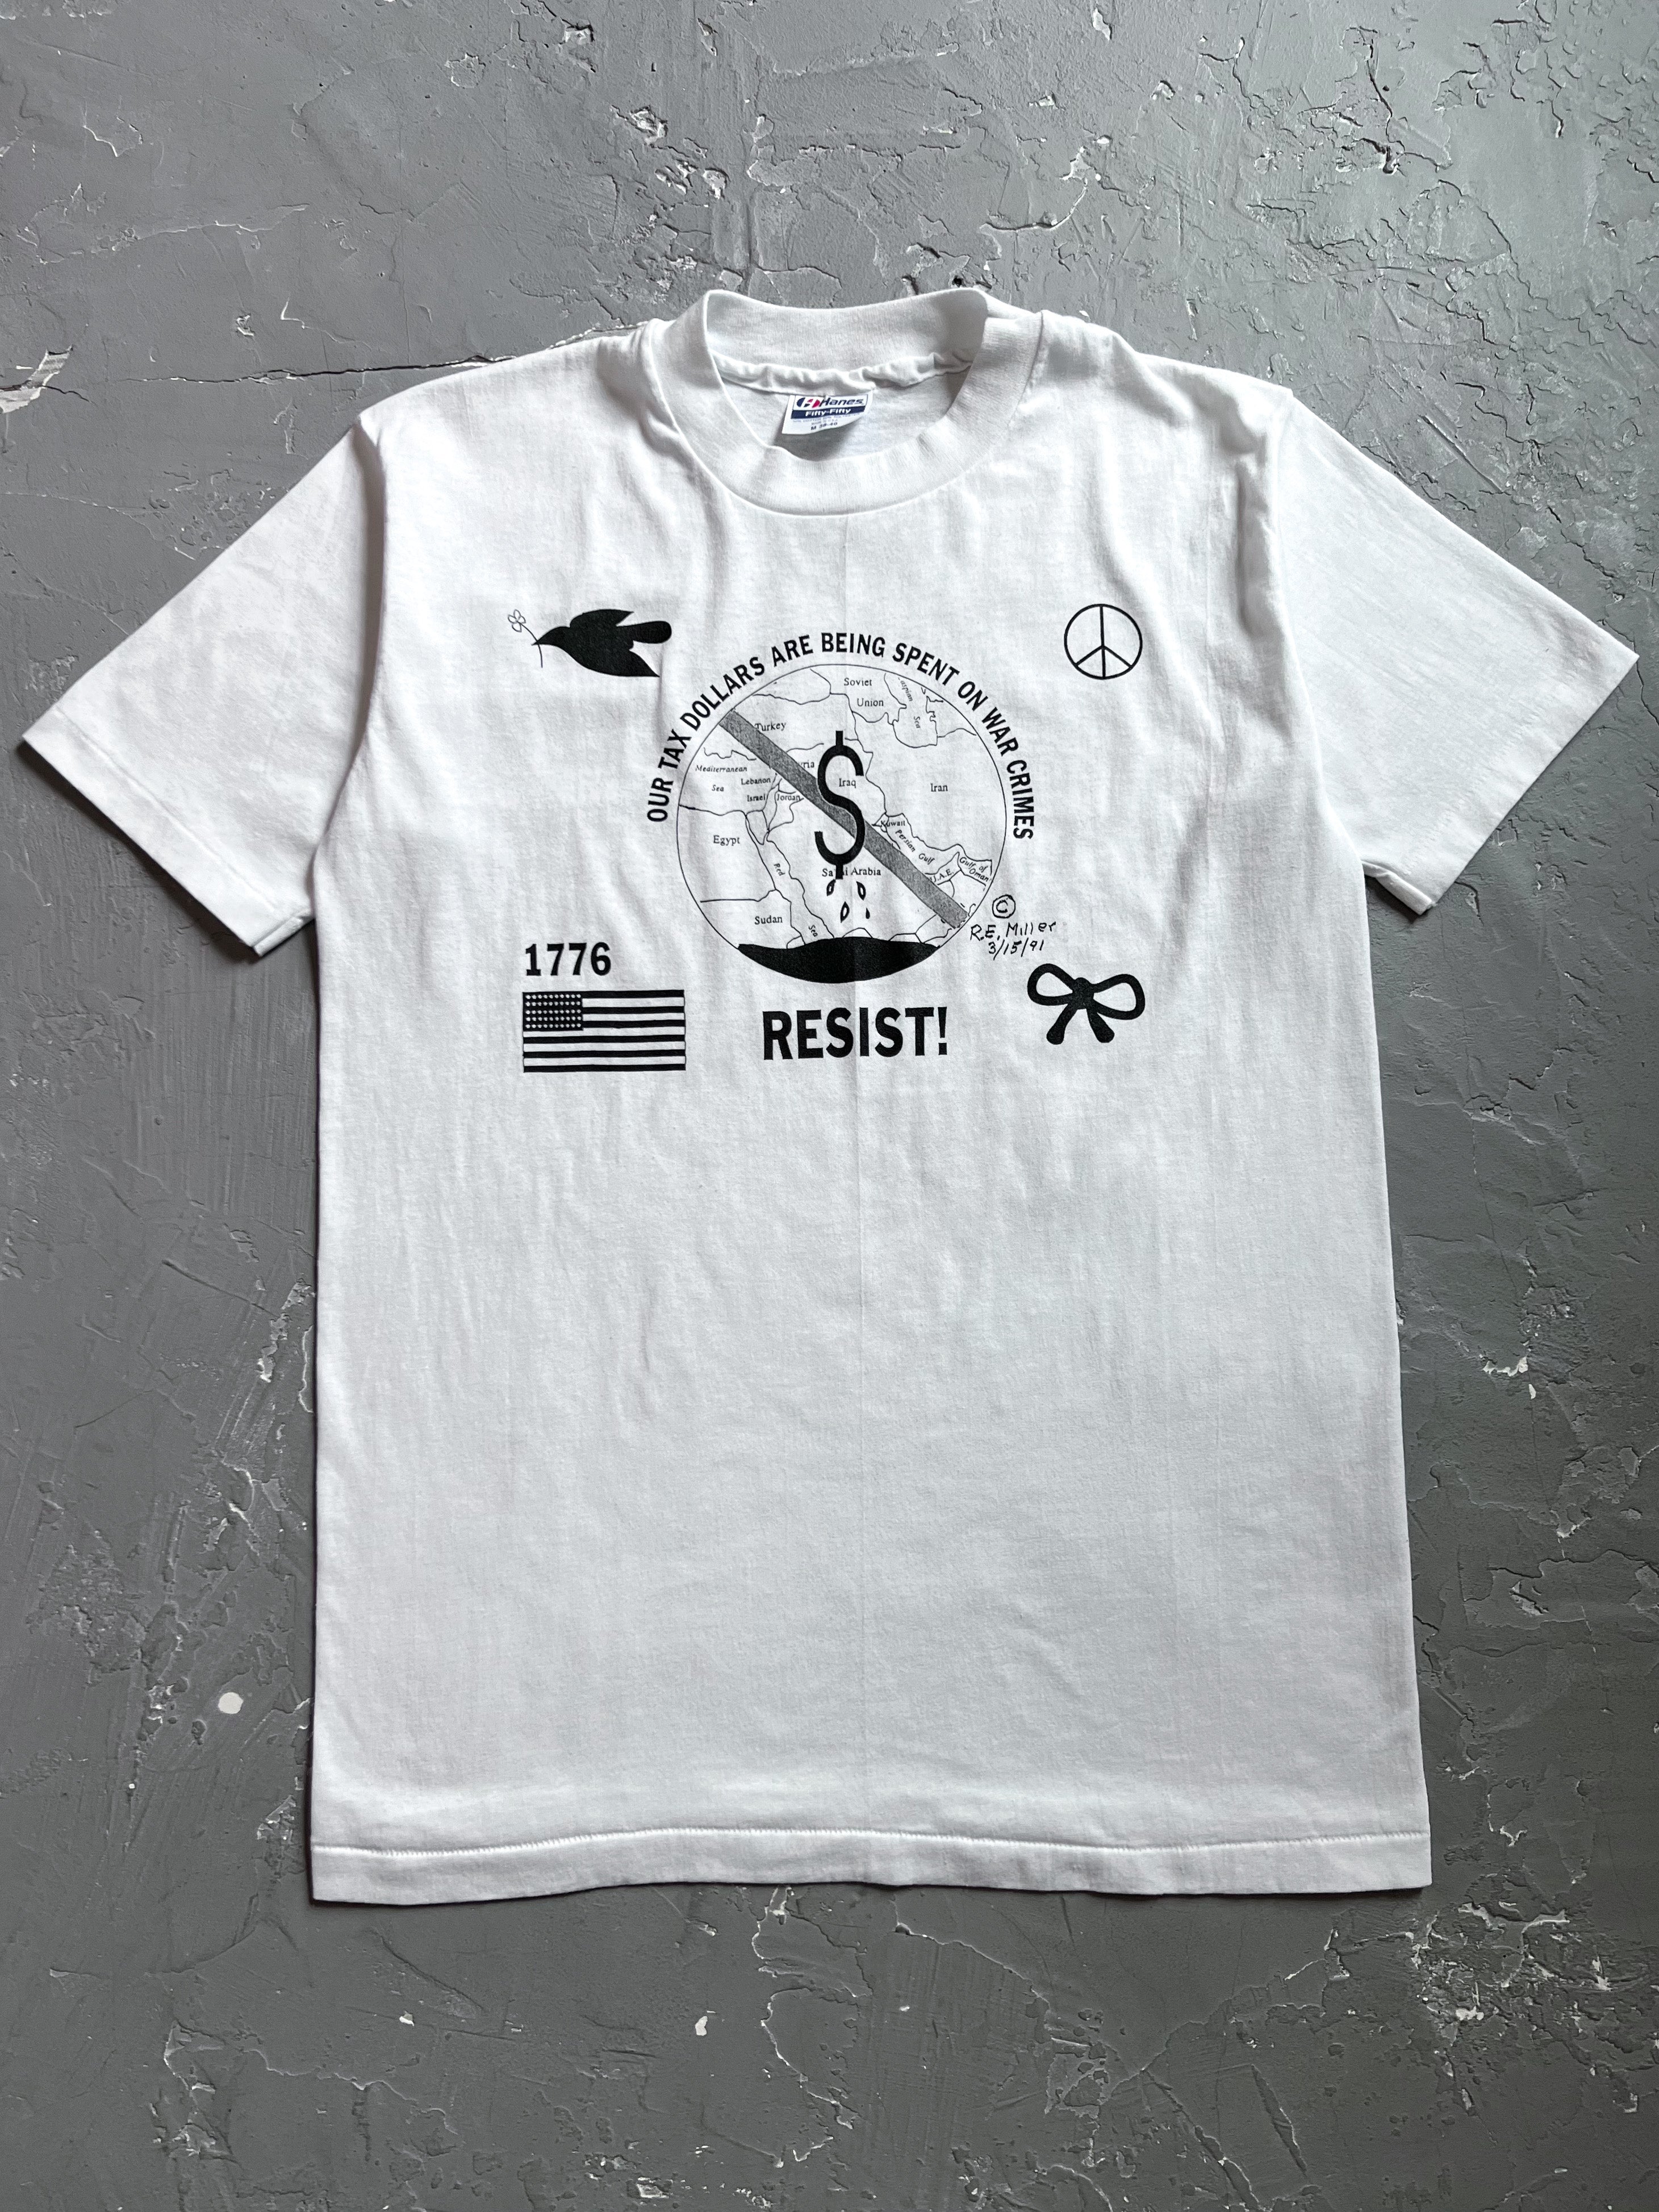 1991 “Our Tax Dollars Are Being Spent On War Crimes” Tee [M]